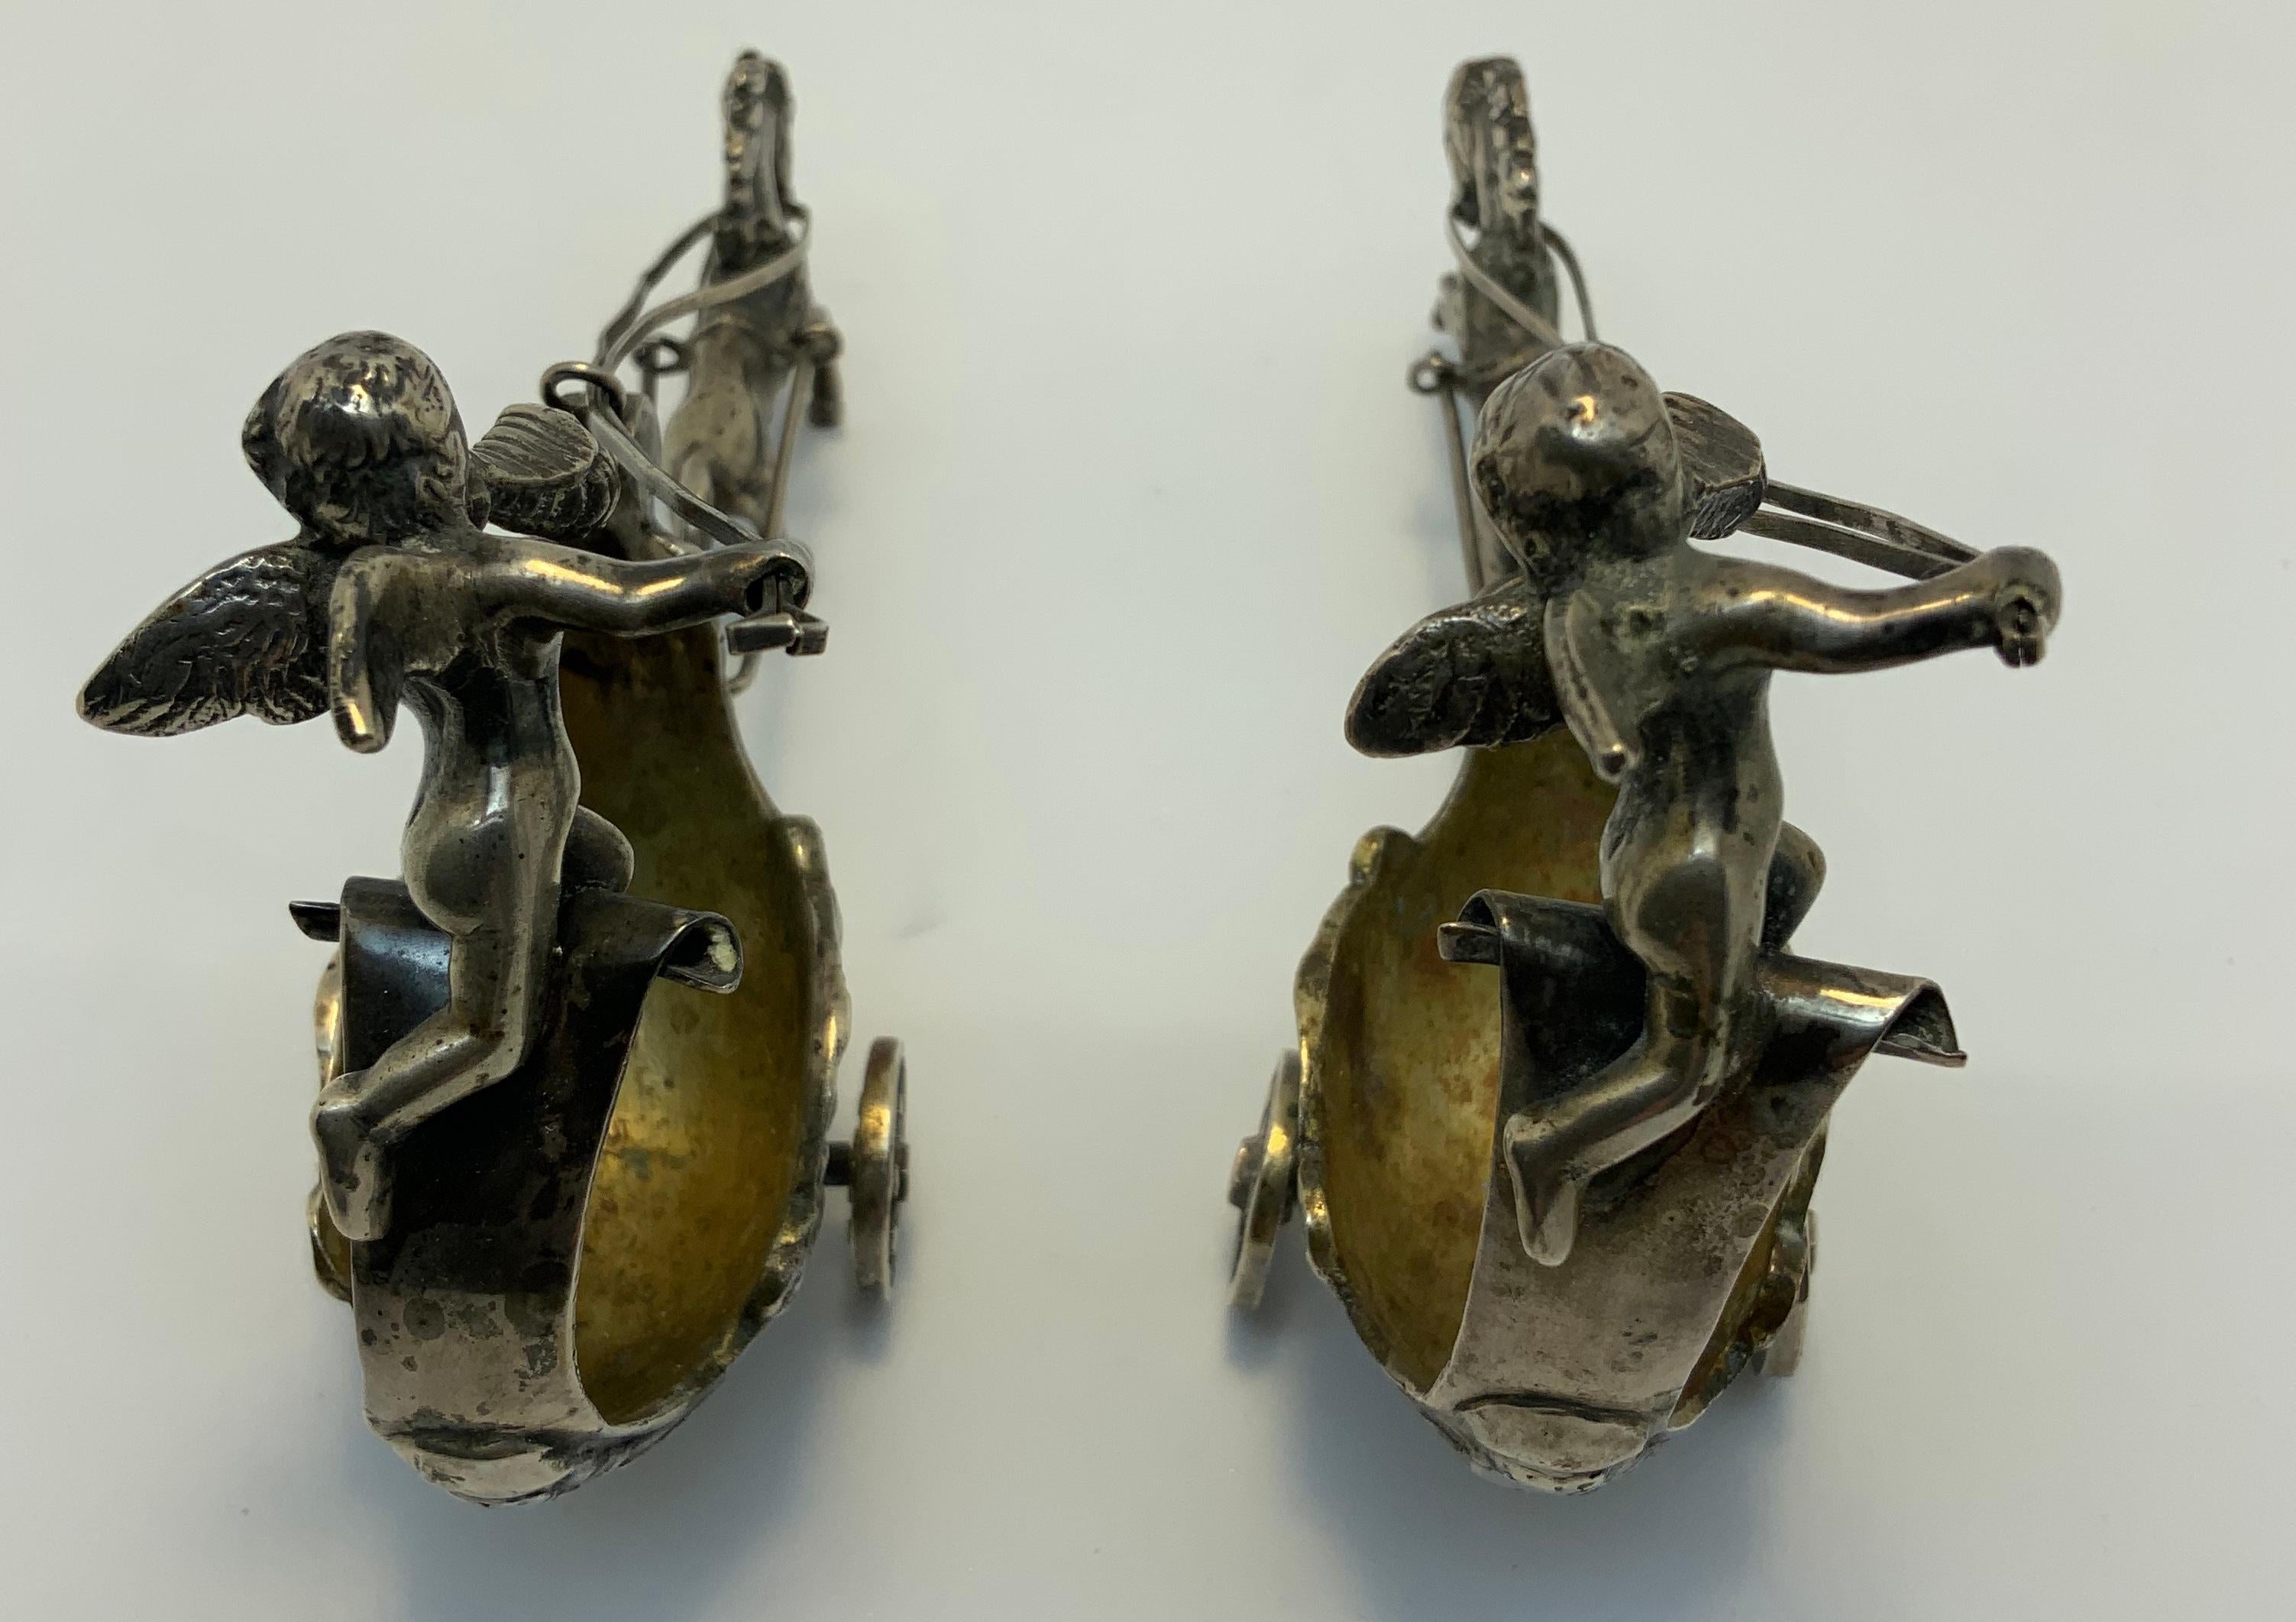 Rococo Revival Pair of Silver Chariots Driven by Winged Cherub Salt Cellars